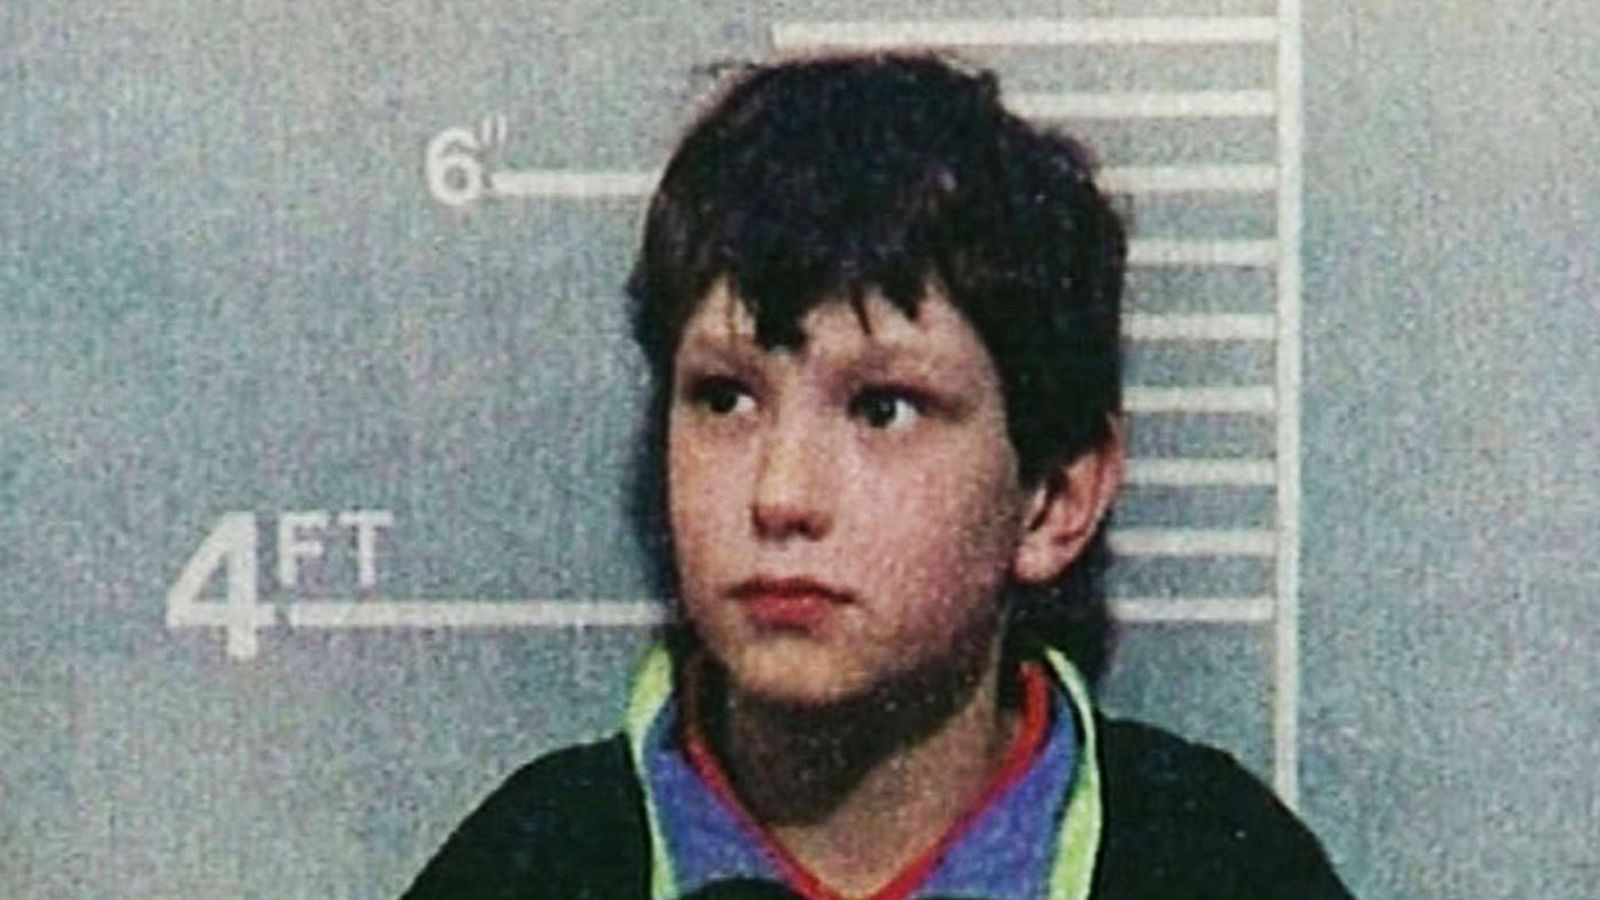 Venables 'feels he is the one that has been wronged' - but 'should never be released', says James Bulger's mother